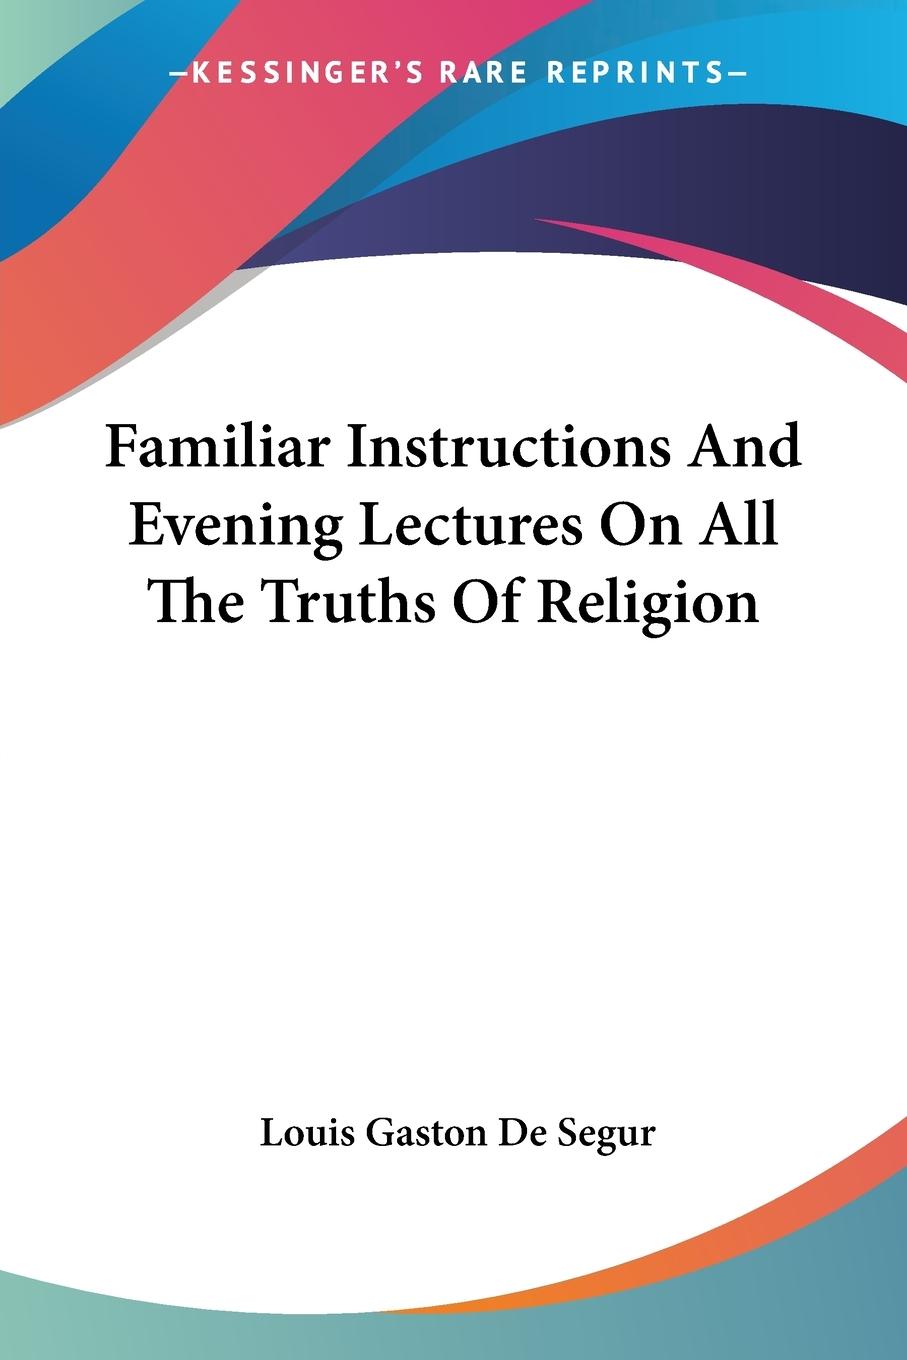 Familiar Instructions And Evening Lectures On All The Truths Of Religion - De Segur, Louis Gaston